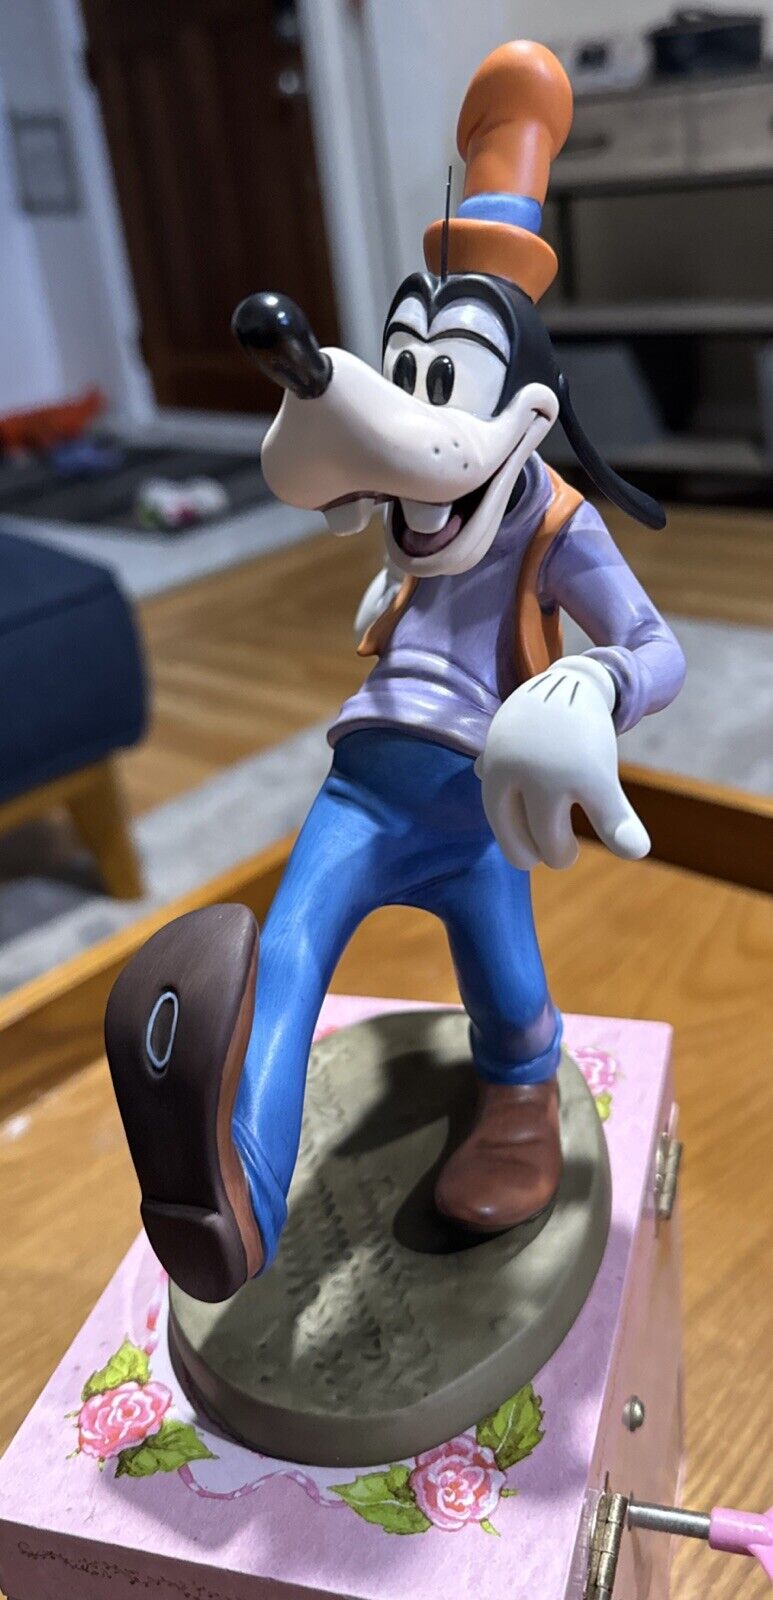 WDCC WALT DISNEY CLASSIC COLLECTION GOOFY MOVING DAY 1997 MEMBERS ONLY SCULPTURE